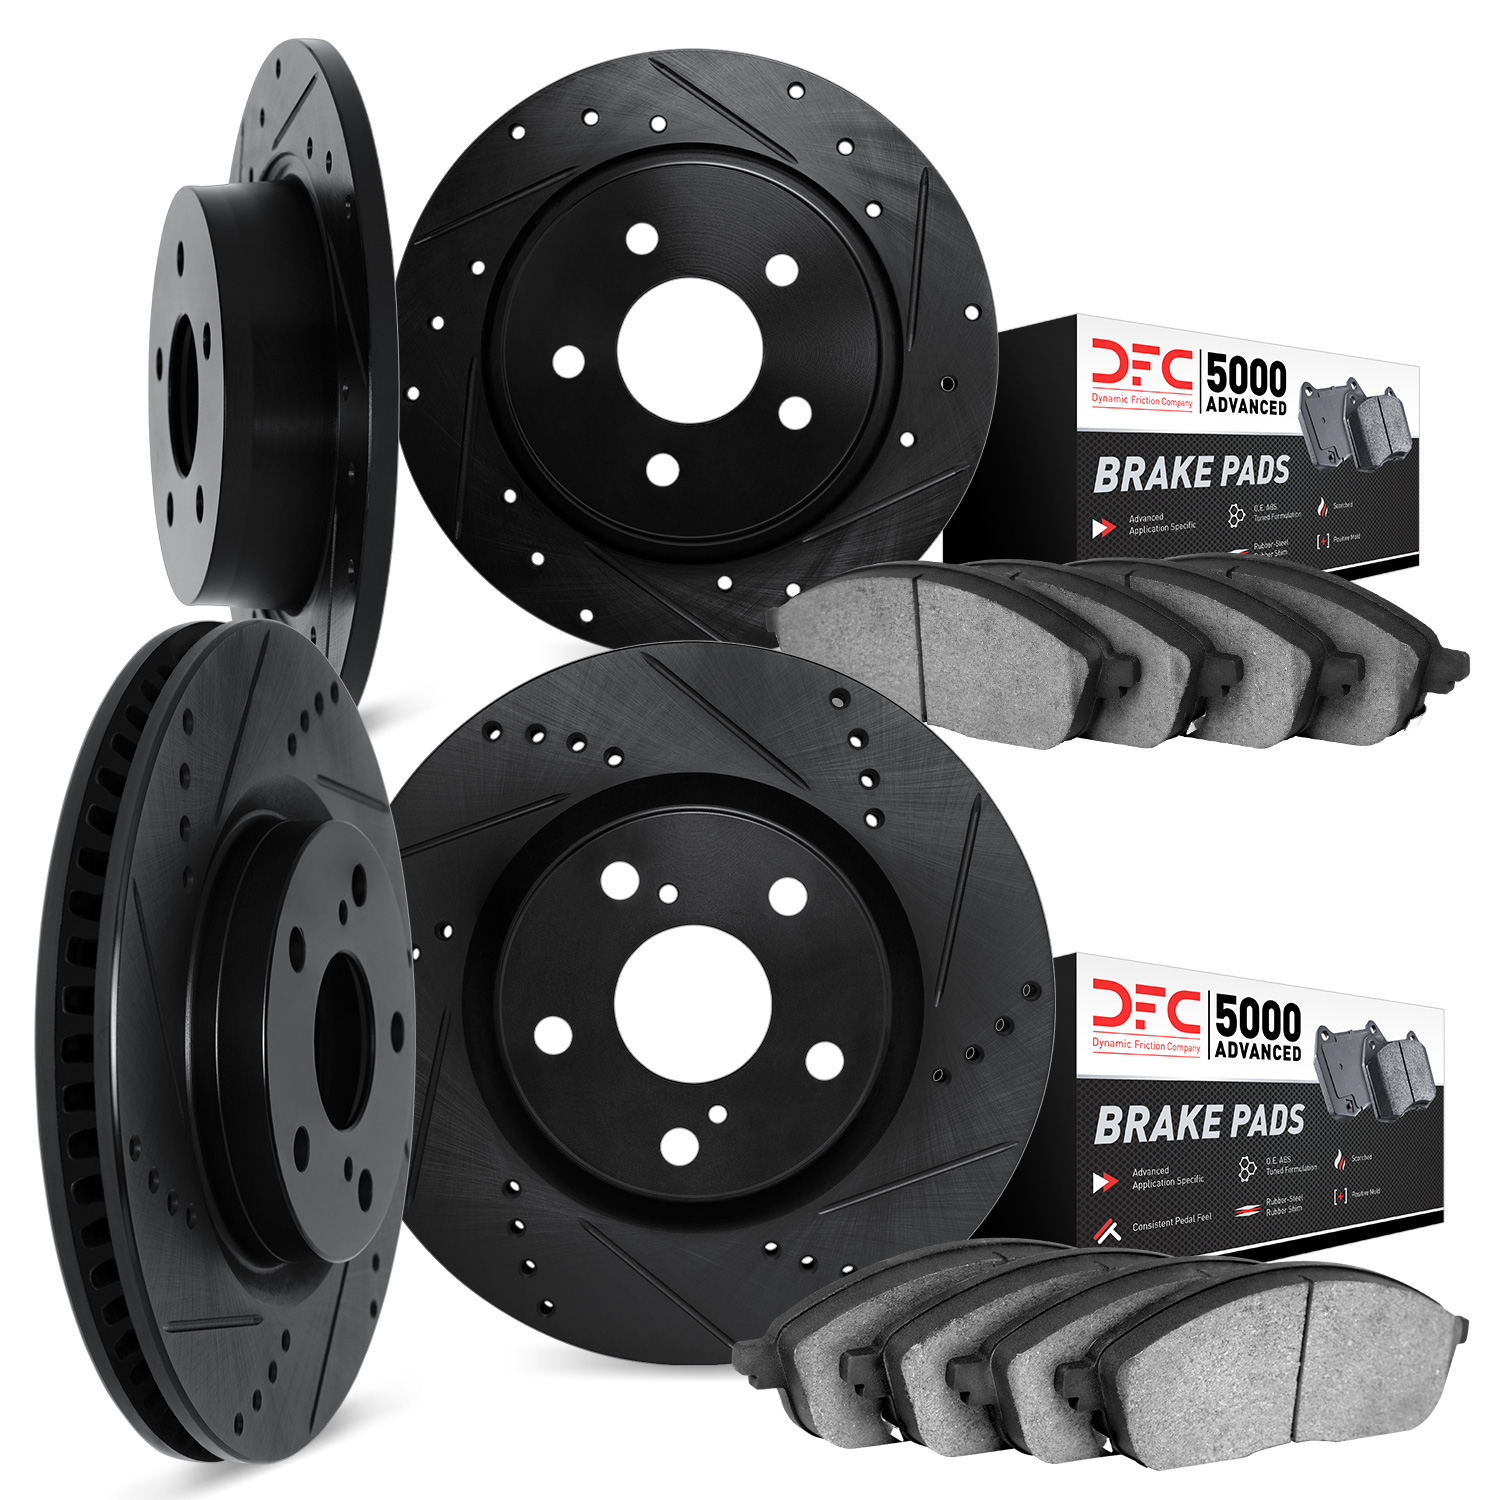 8504-74073 Drilled/Slotted Brake Rotors w/5000 Advanced Brake Pads Kit [Black], 2012-2015 Audi/Volkswagen, Position: Front and R